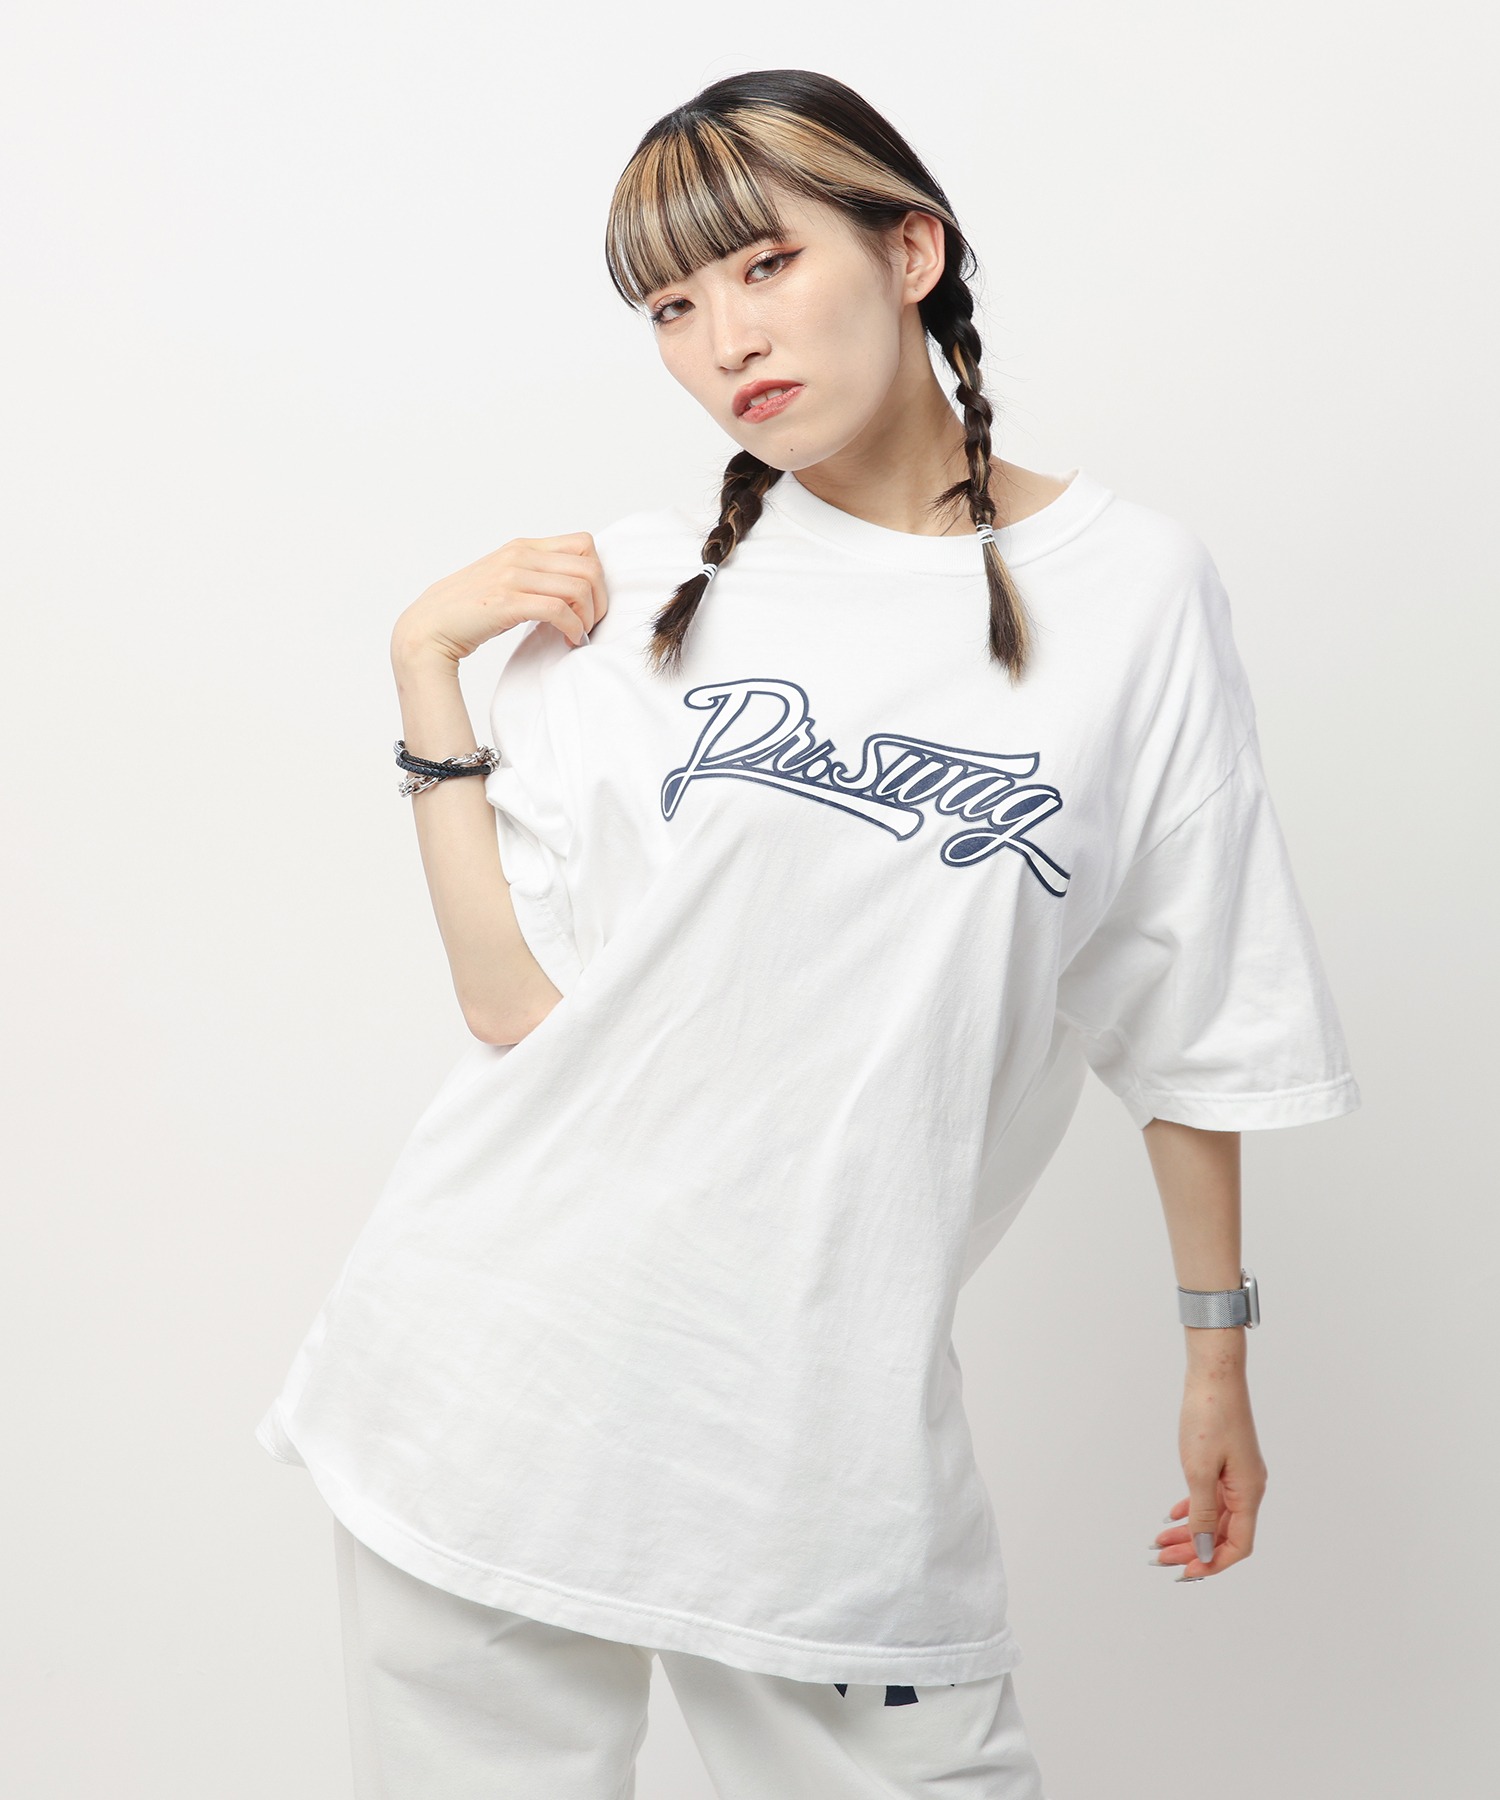 MLB】Dr.SWAGコラボフロッキープリントTシャツ BACK TO THE FIELD(BTTF